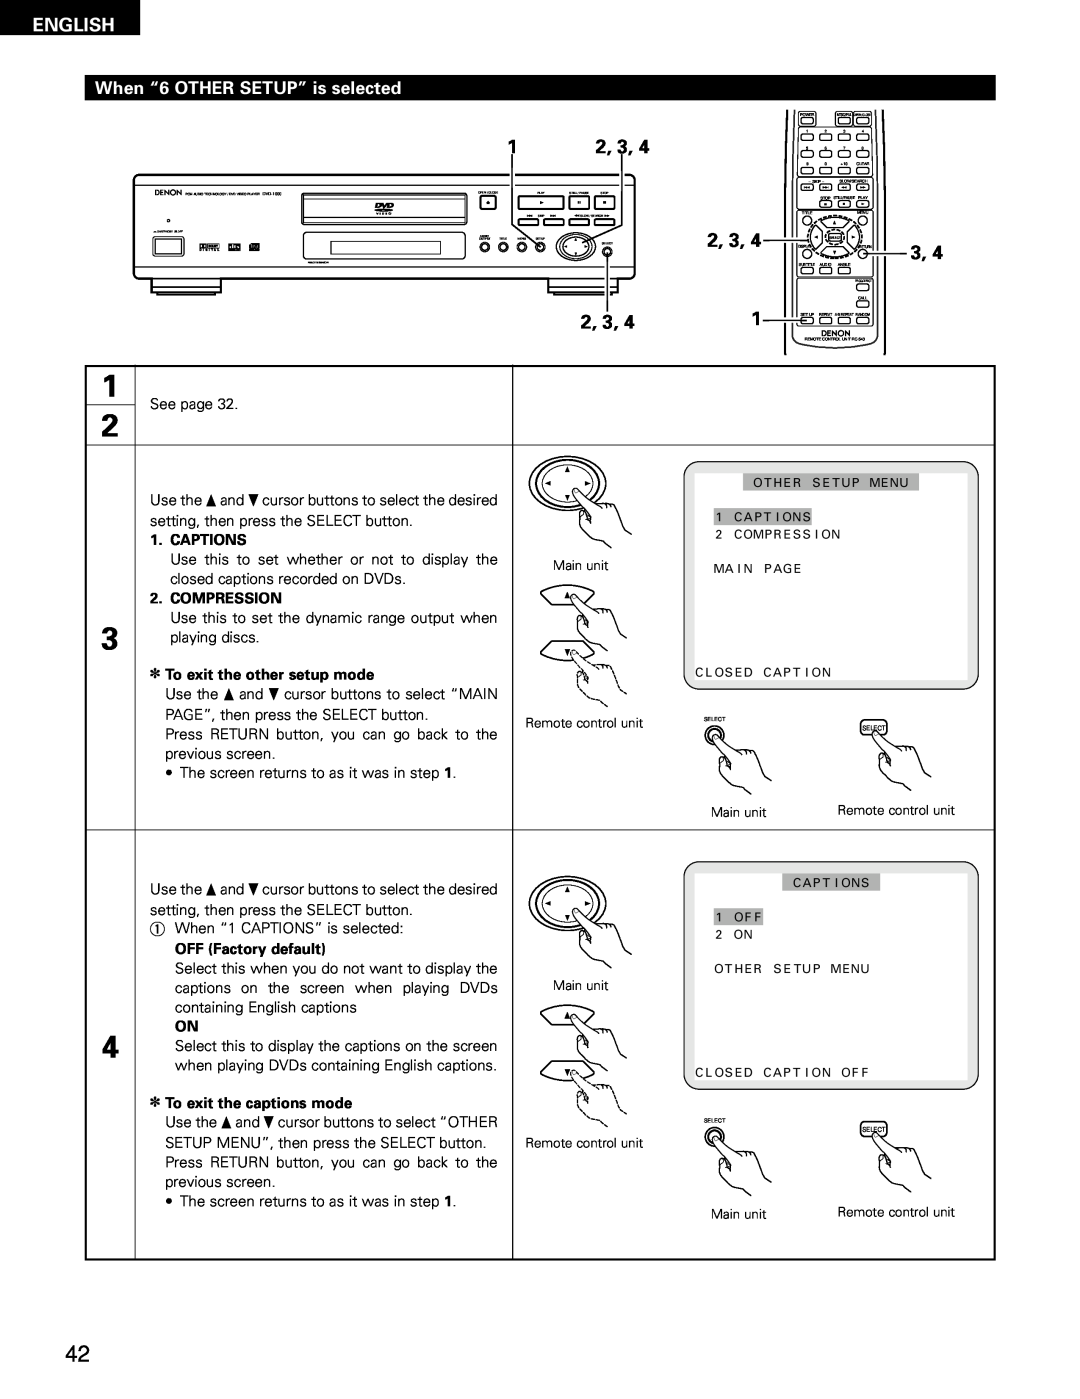 Denon DVD-1000 manual When “6 OTHER SETUP” is selected, 2, 3, English, Captions, Compression, To exit the other setup mode 